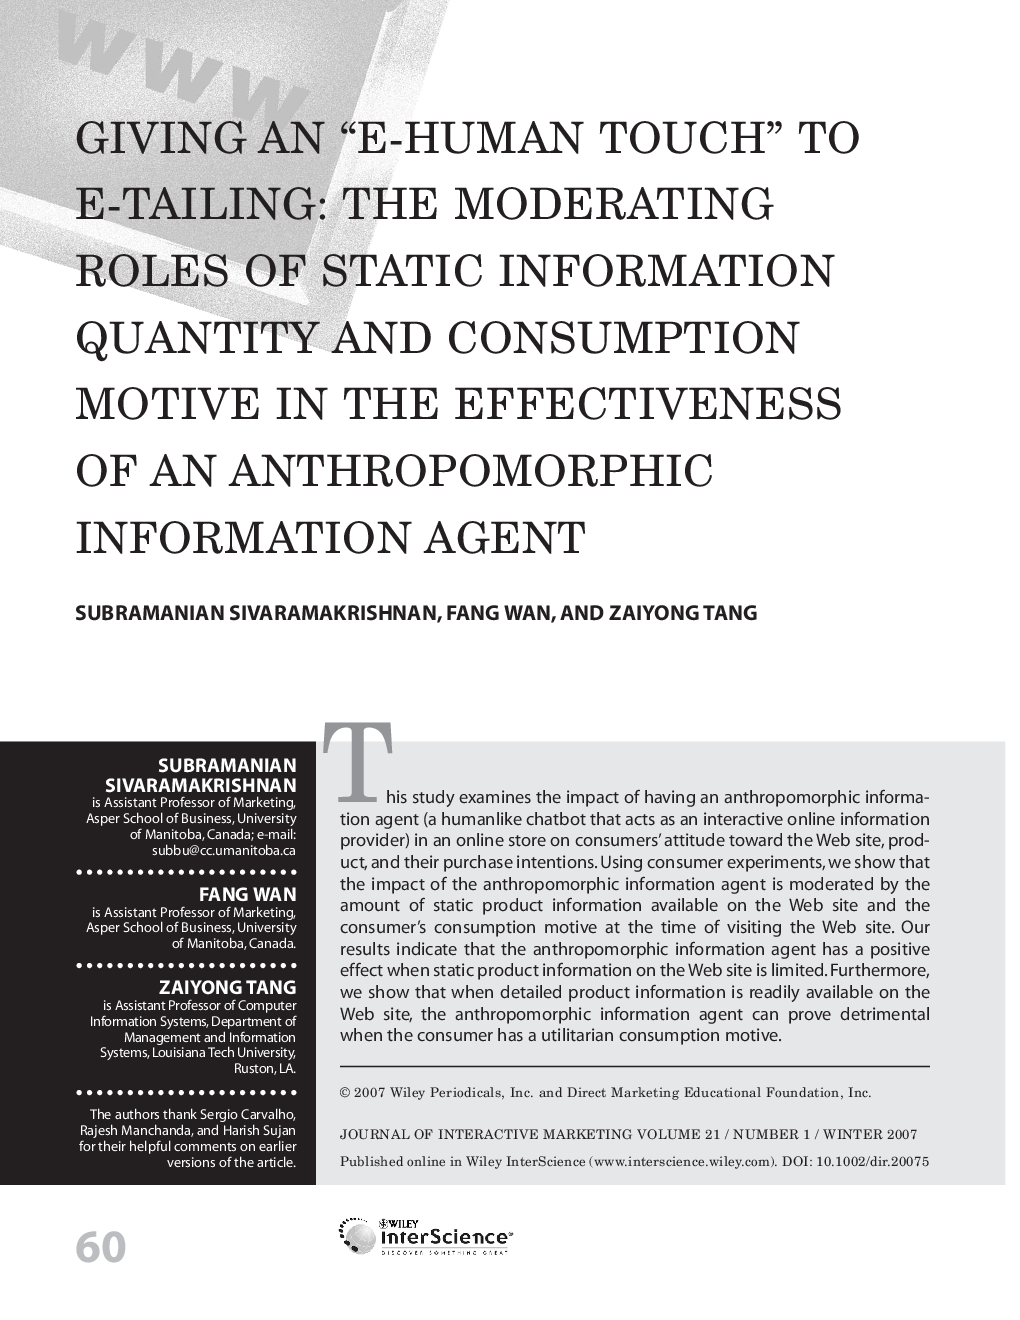 Giving an “e-human touch” to e-tailing: The moderating roles of static information quantity and consumption motive in the effectiveness of an anthropomorphic information agent